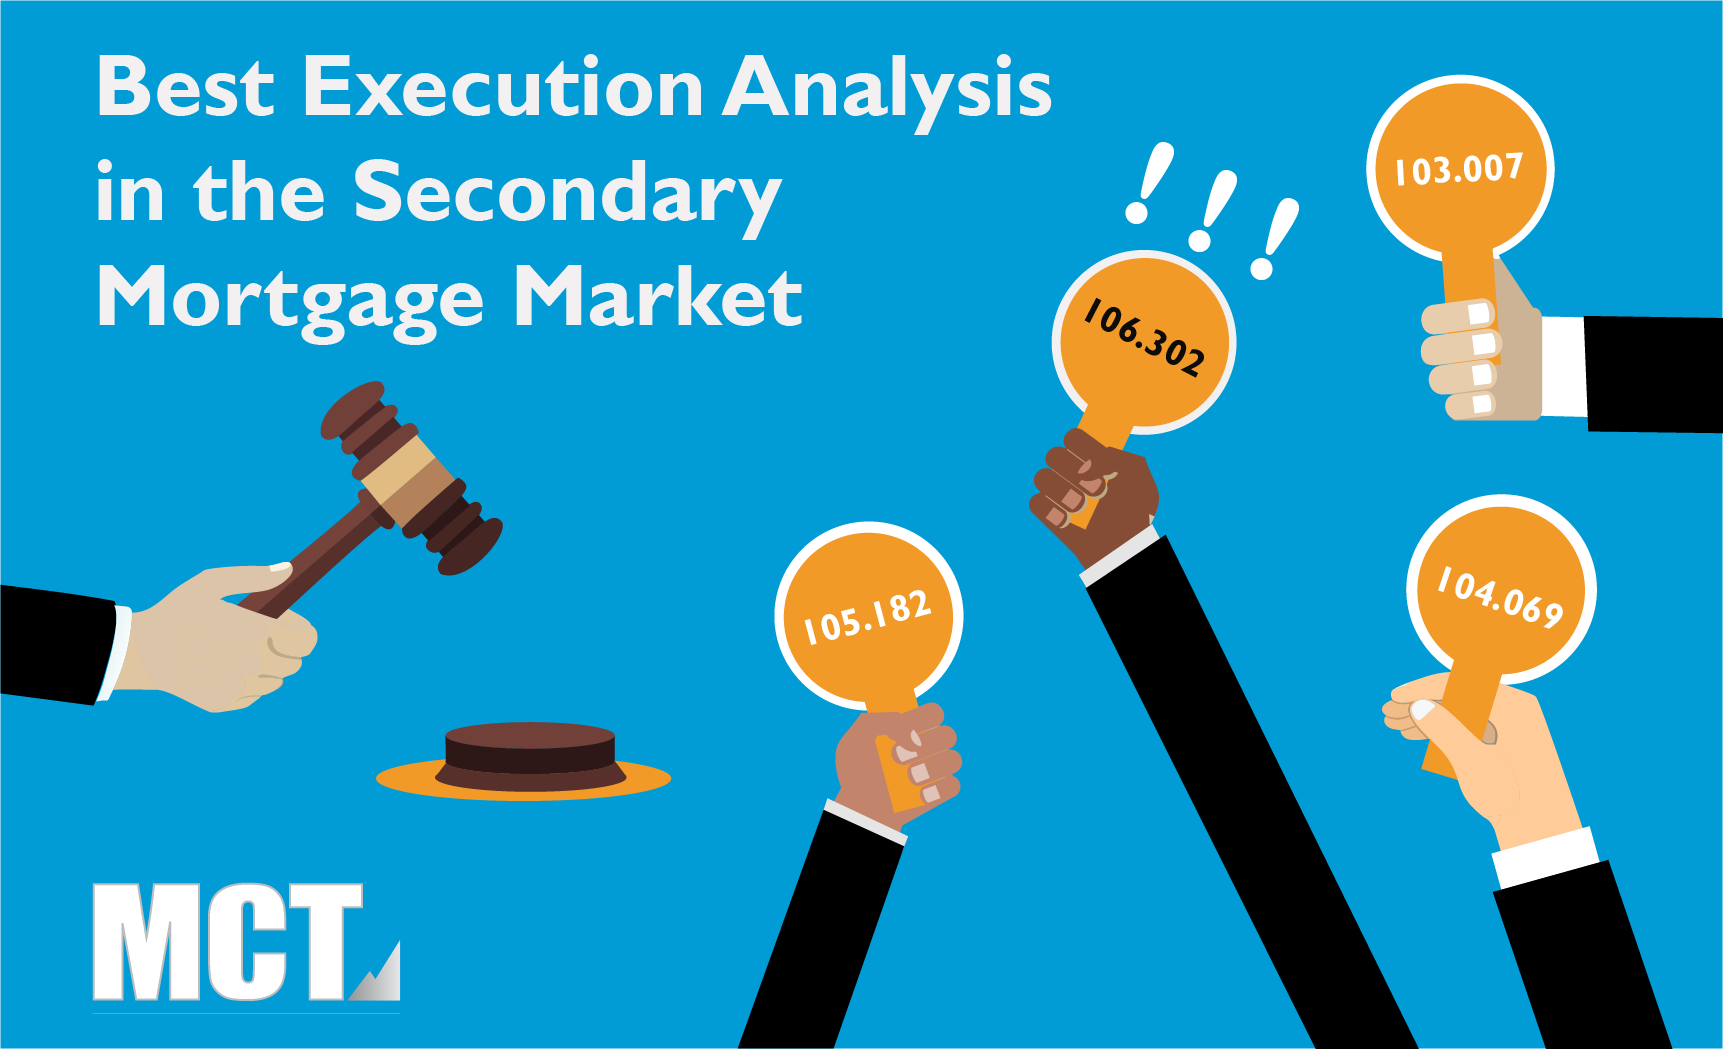 Best Execution Analysis in the Secondary Mortgage Market